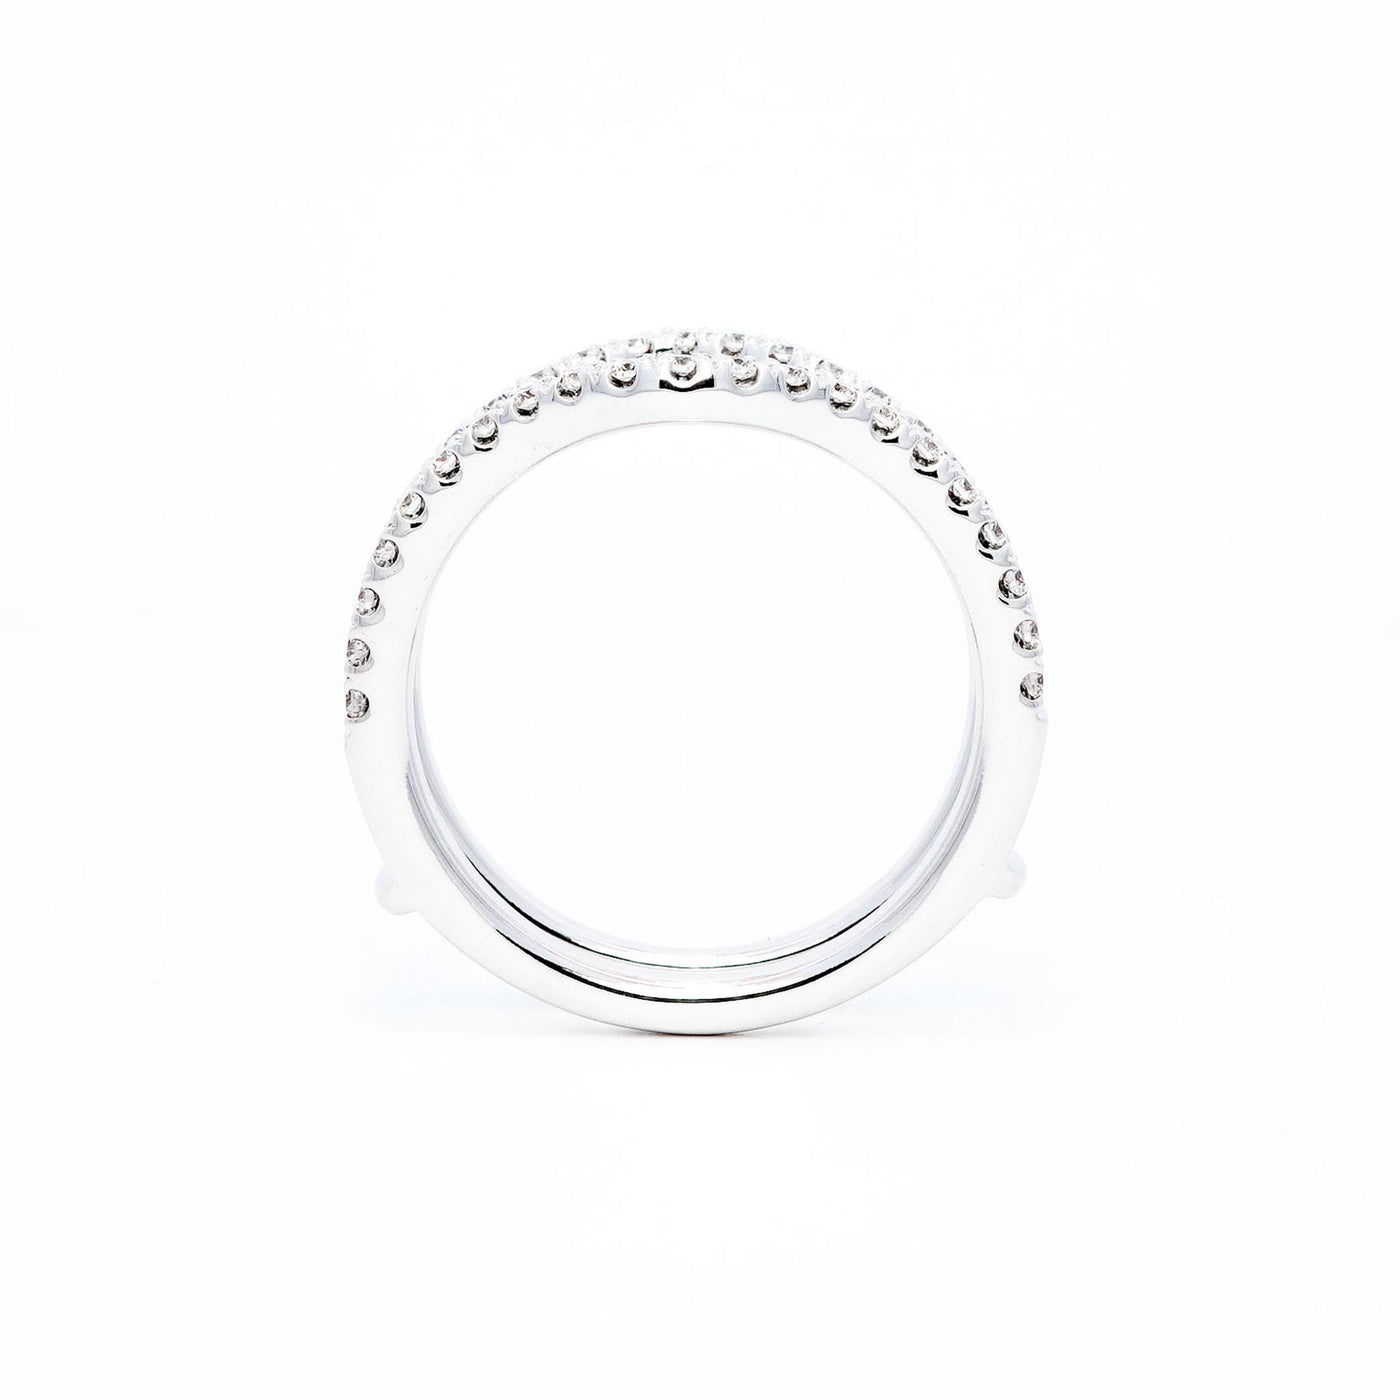 14K White Gold .55ctw Curved Diamond Ring Guard